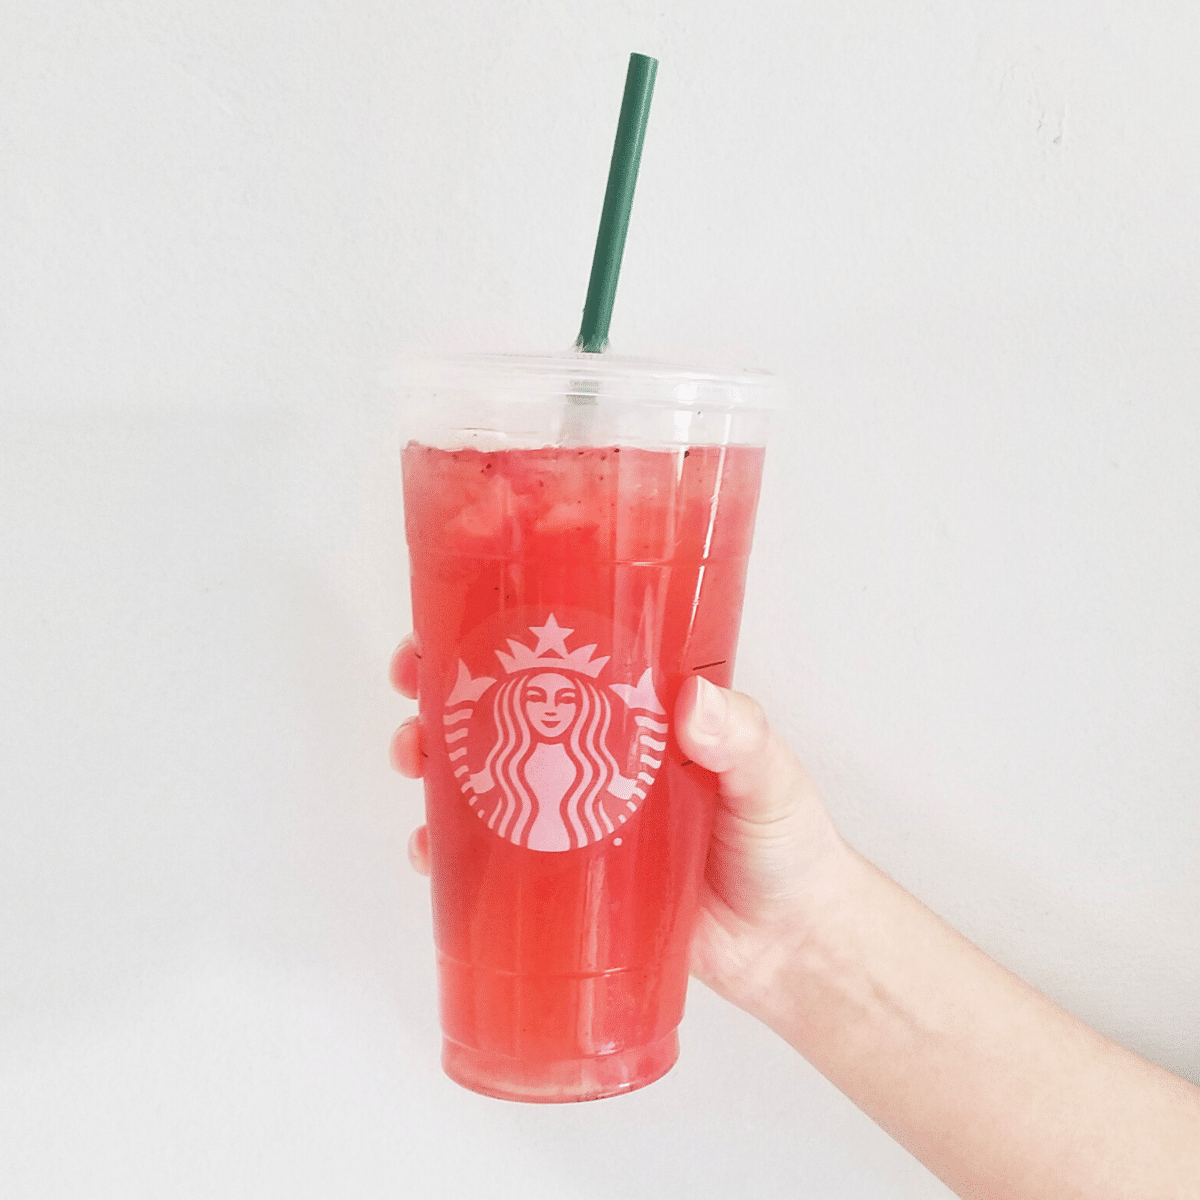 https://www.mandyolive.com/wp-content/uploads/2021/10/starbucks-strawberry-acai-refresher-featured-image.png